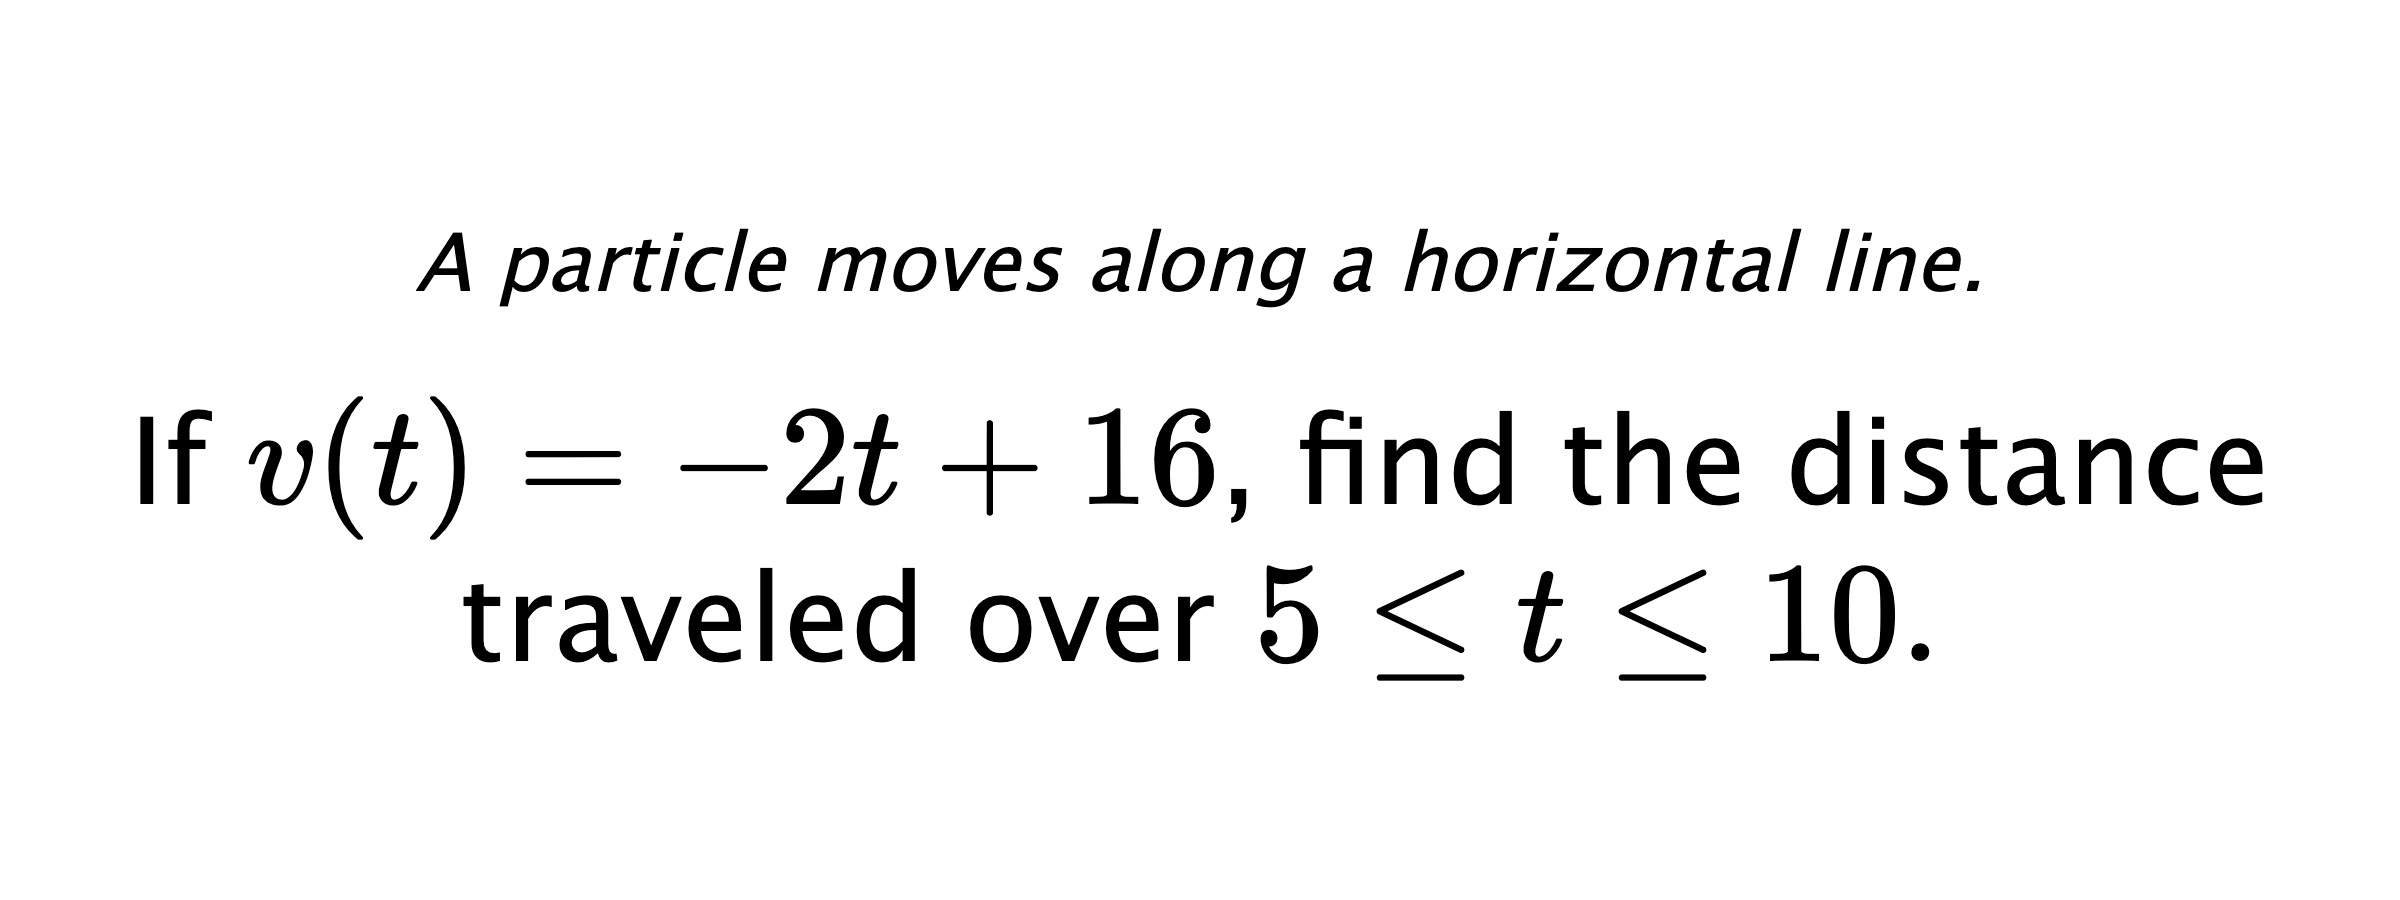 A particle moves along a horizontal line. If $ v(t)=-2t+16 $, find the distance traveled over $ 5 \leq t \leq 10 .$